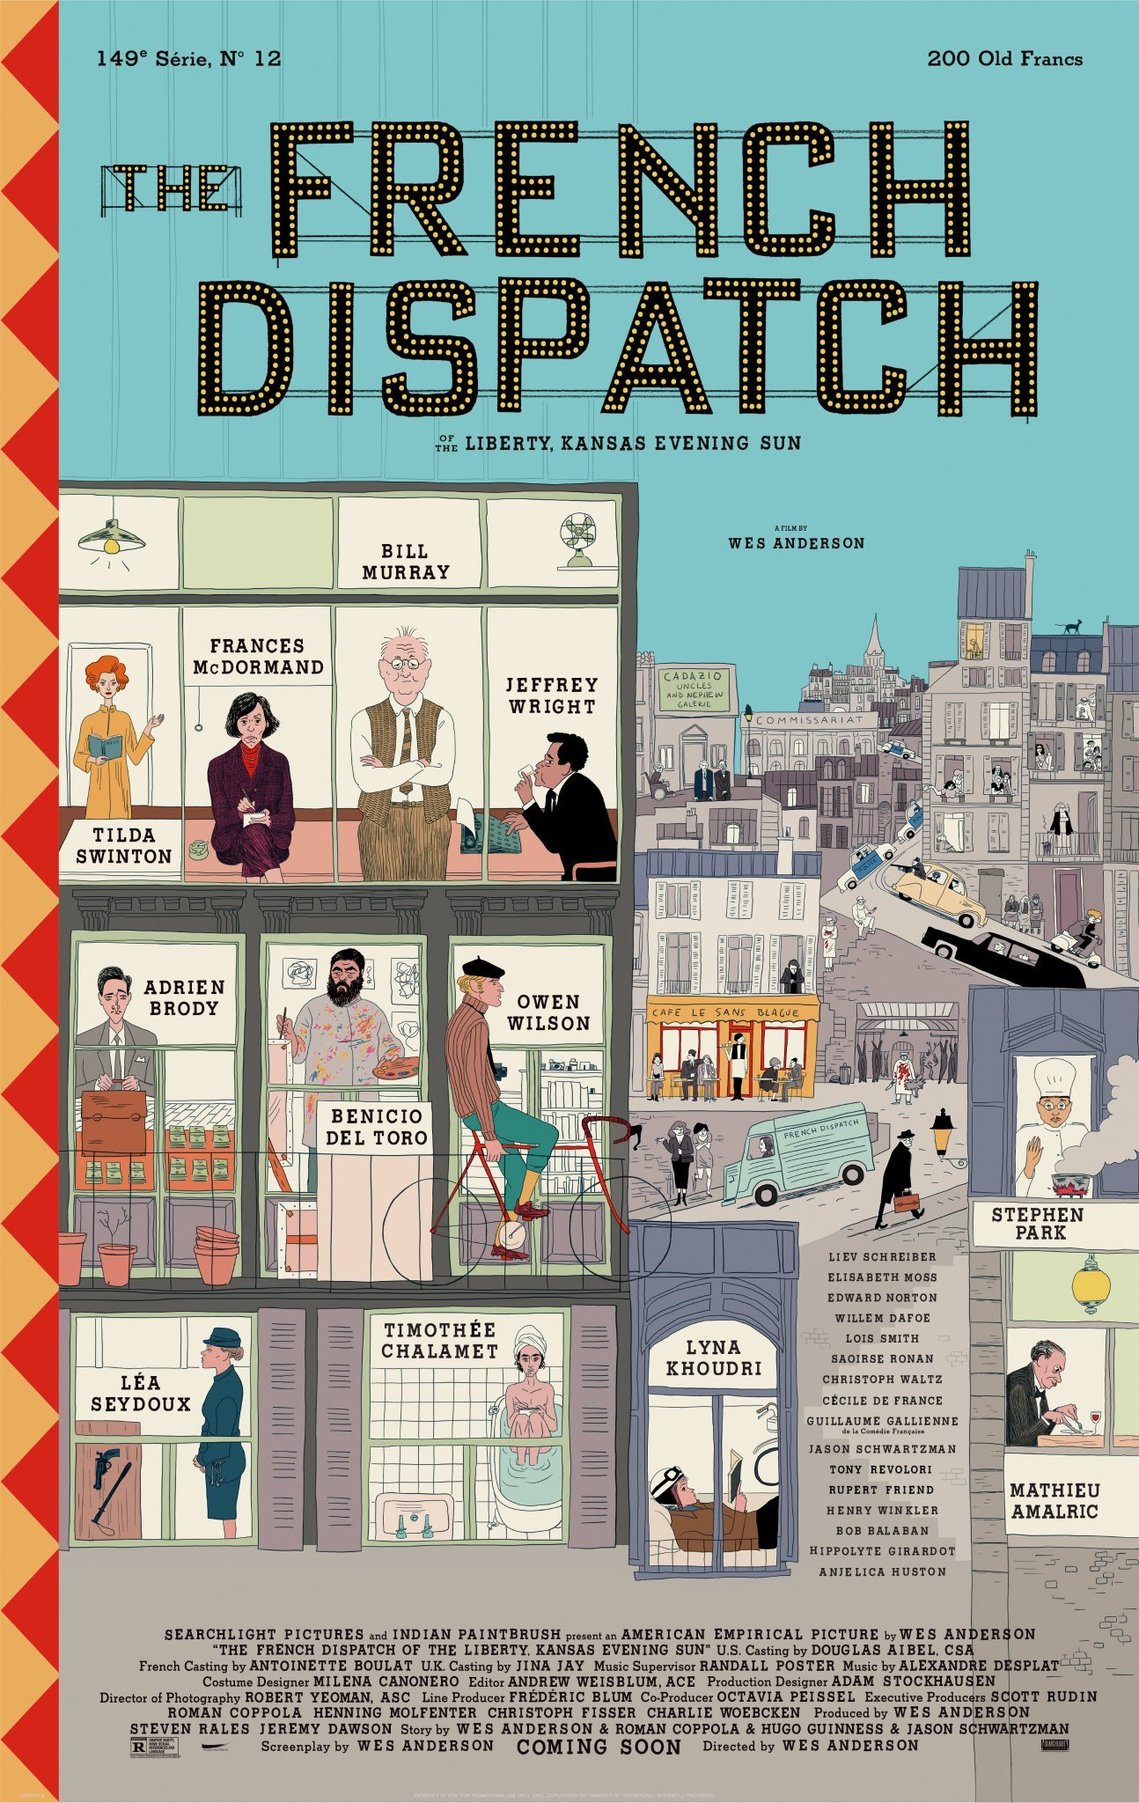 Official poster for The French Dispatch by Wes Anderson    Commissioned work for the film The French Dispatch -  Wes Anderson  by Javi Aznarez 